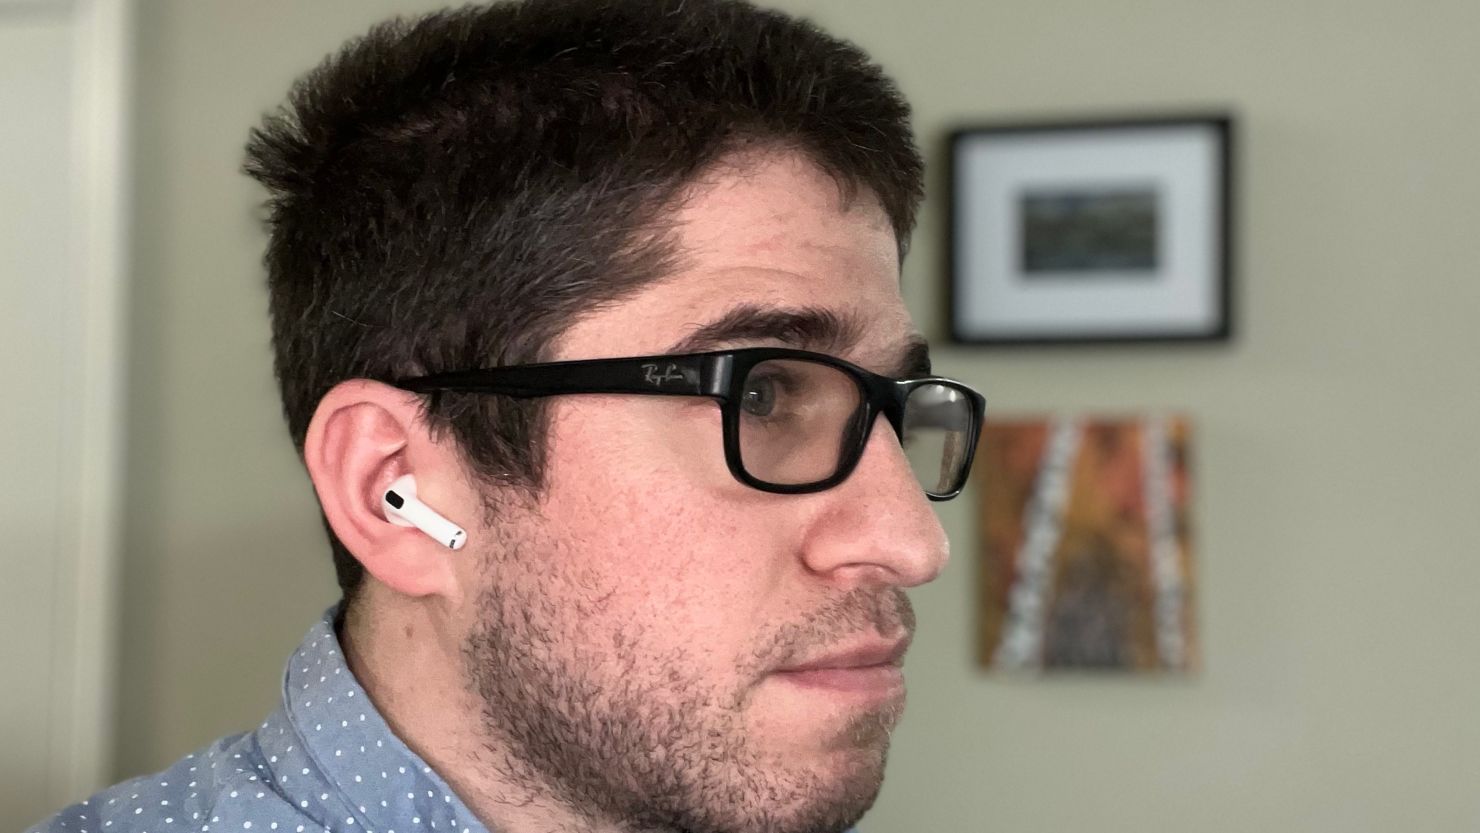 Apple AirPods 3 review: Blurring the line